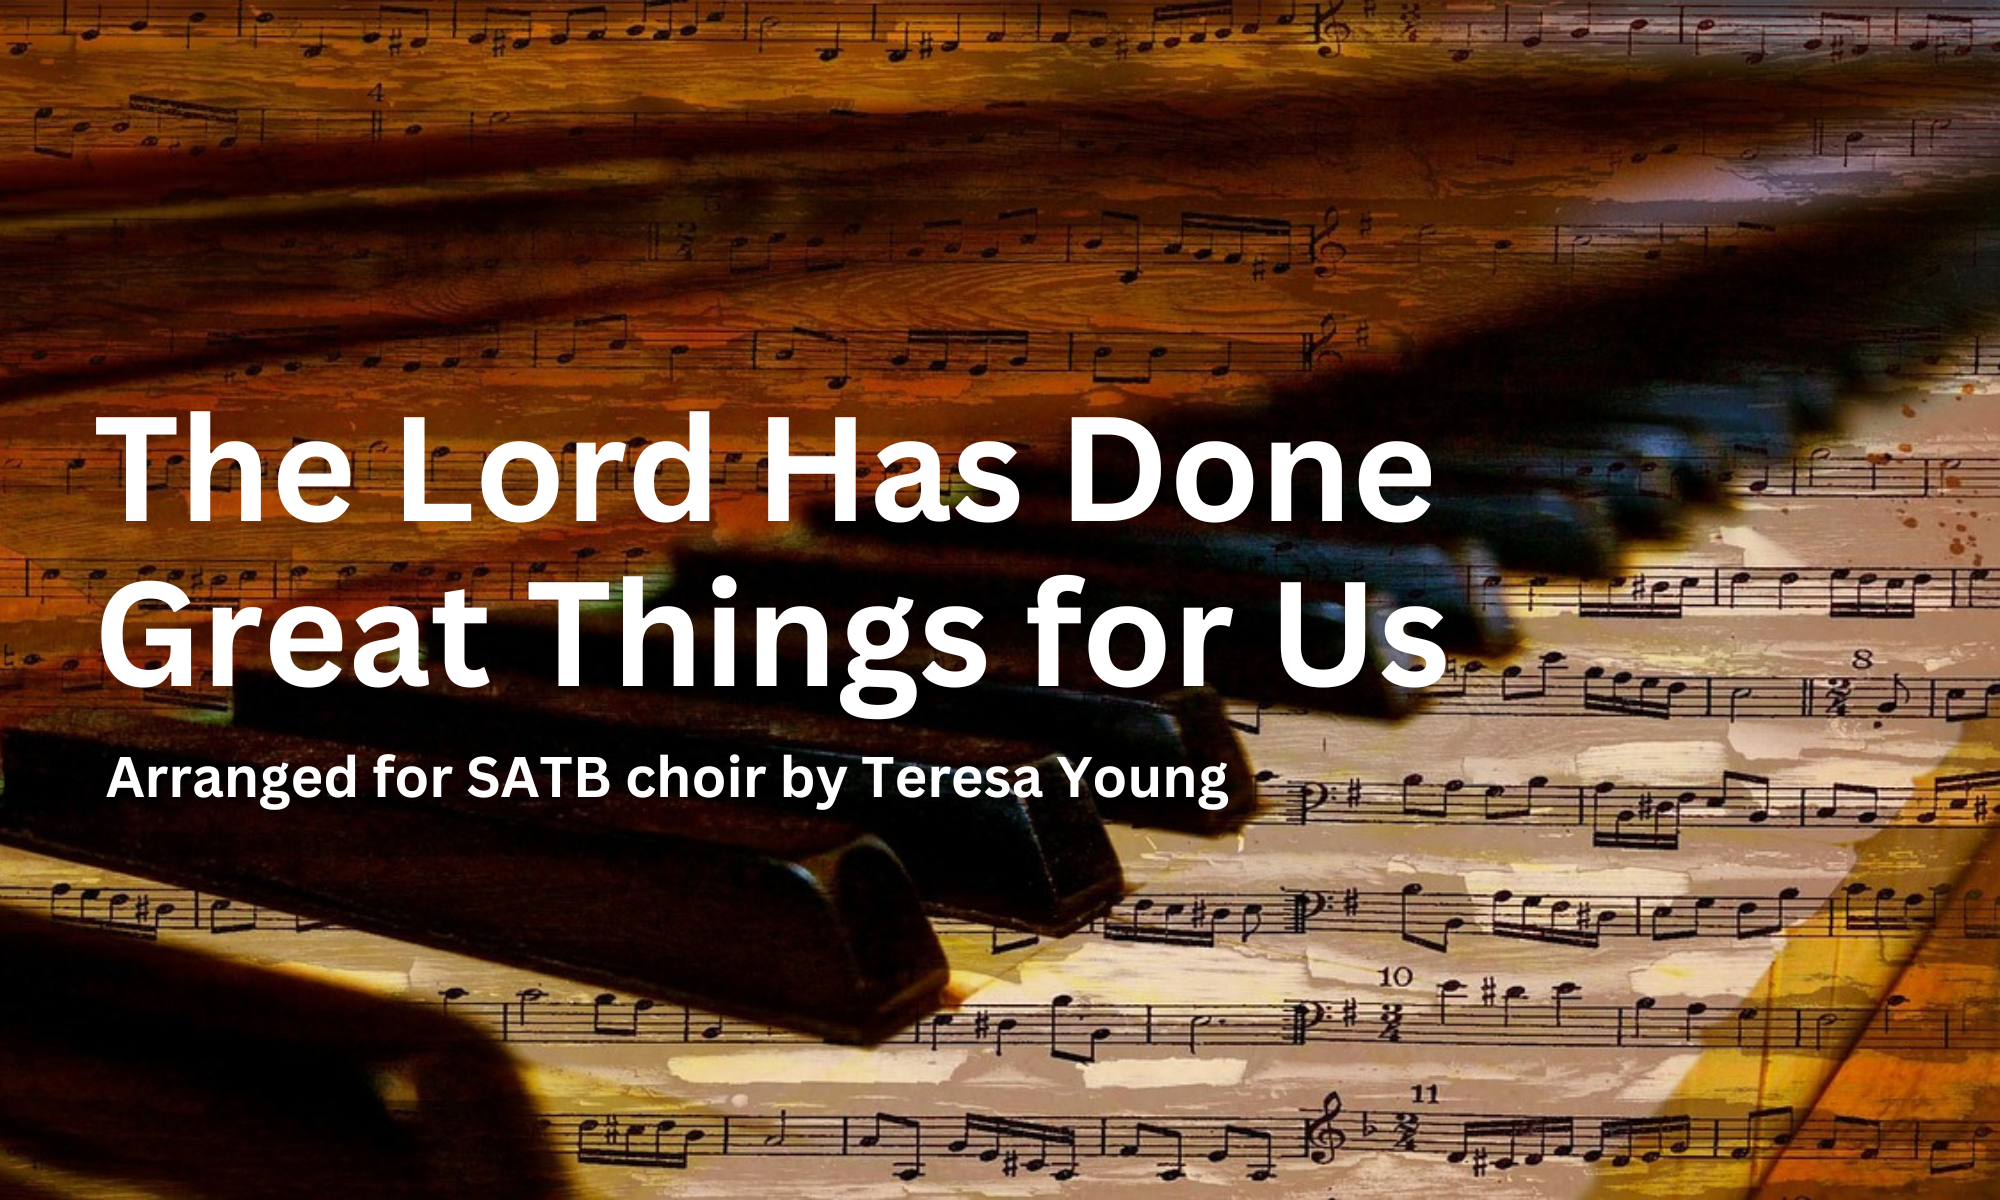 Psalm 126, The Lord Has Done Great Things for Us, arranged for SATB choir by Teresa Young